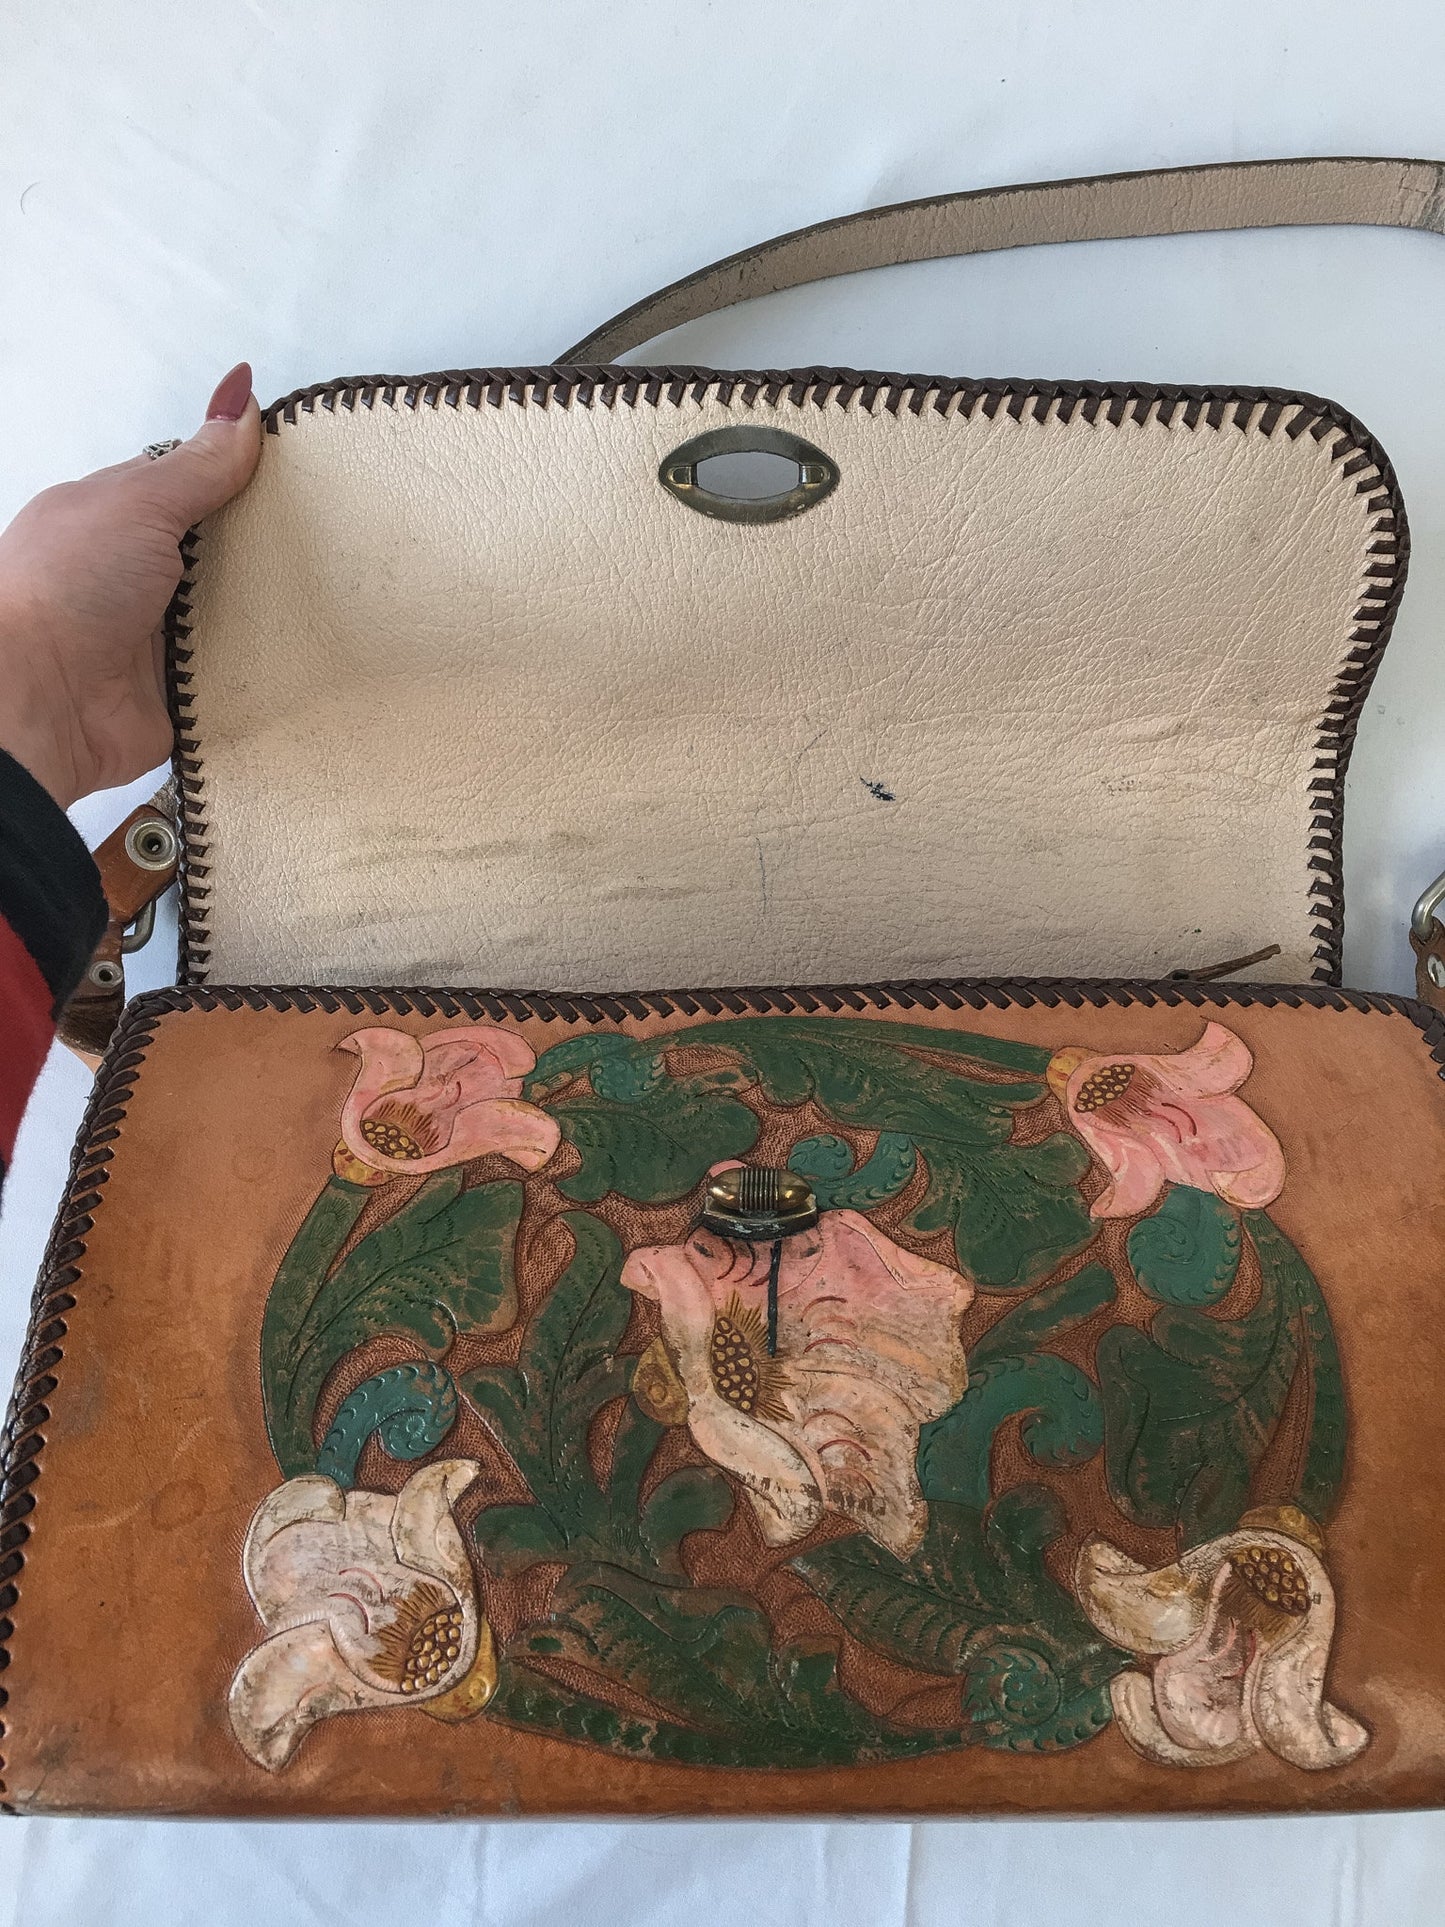 Vintage Handcrafted Brown Tooled Leather Bag with Engraved Floral and Horse Detail